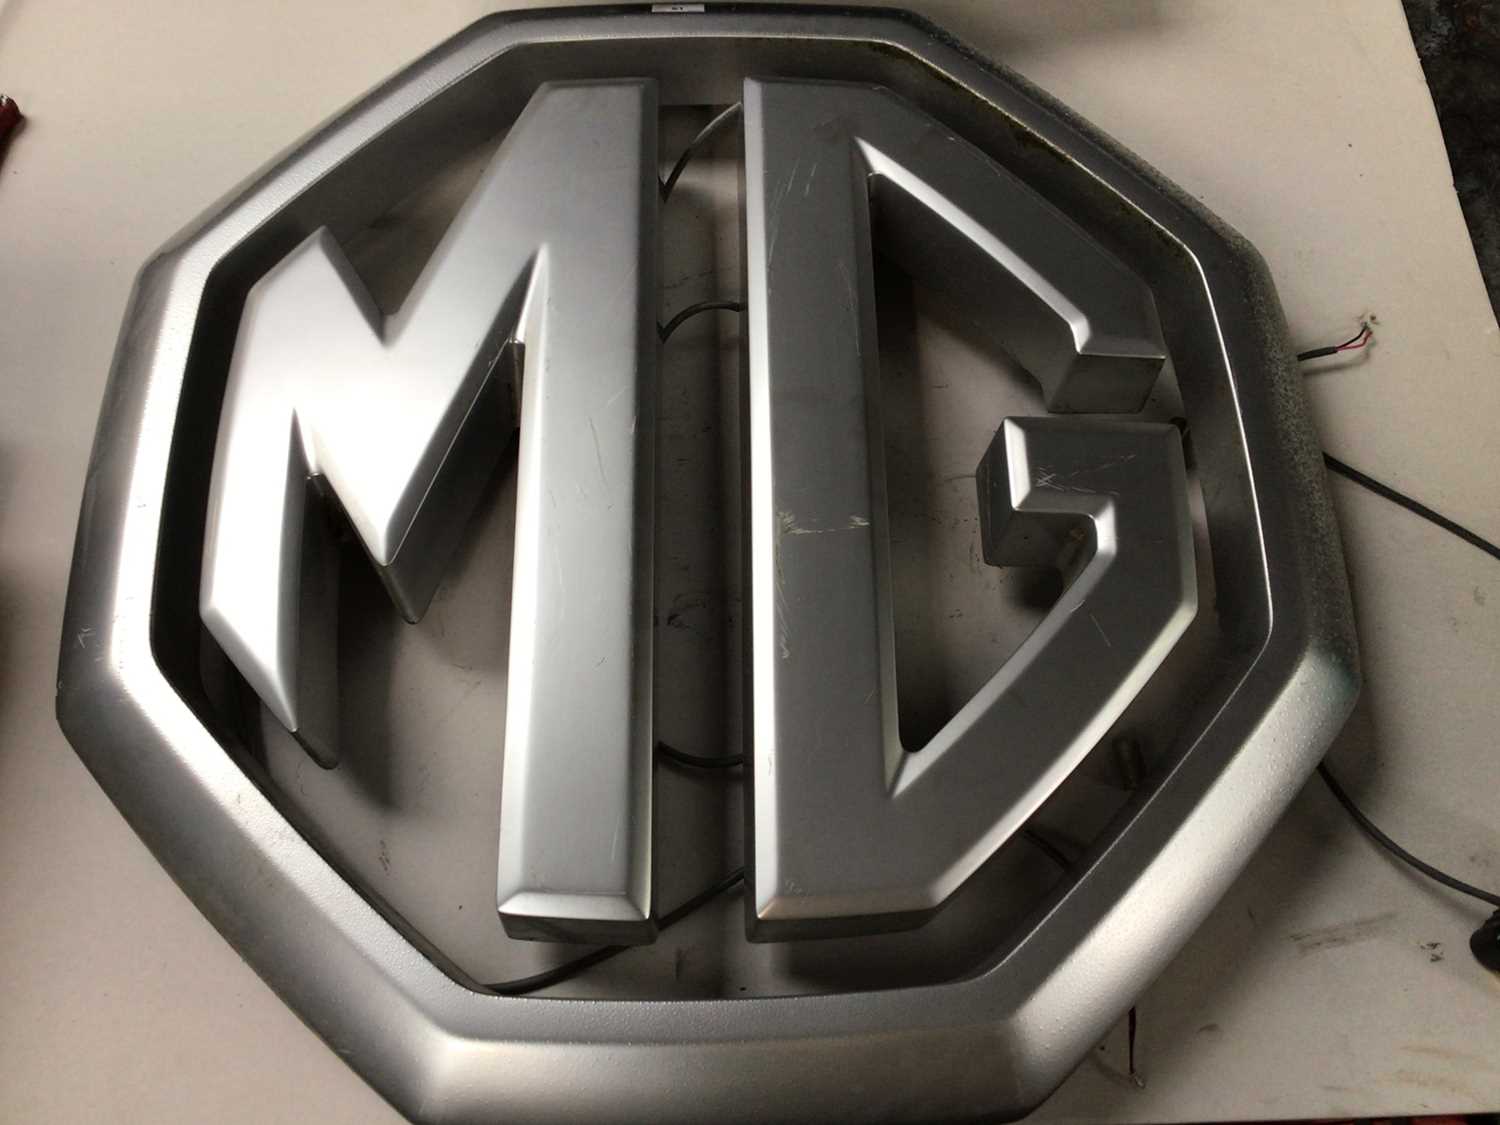 Lot 81 - MG Motor UK commercial dealership external sign, in three parts